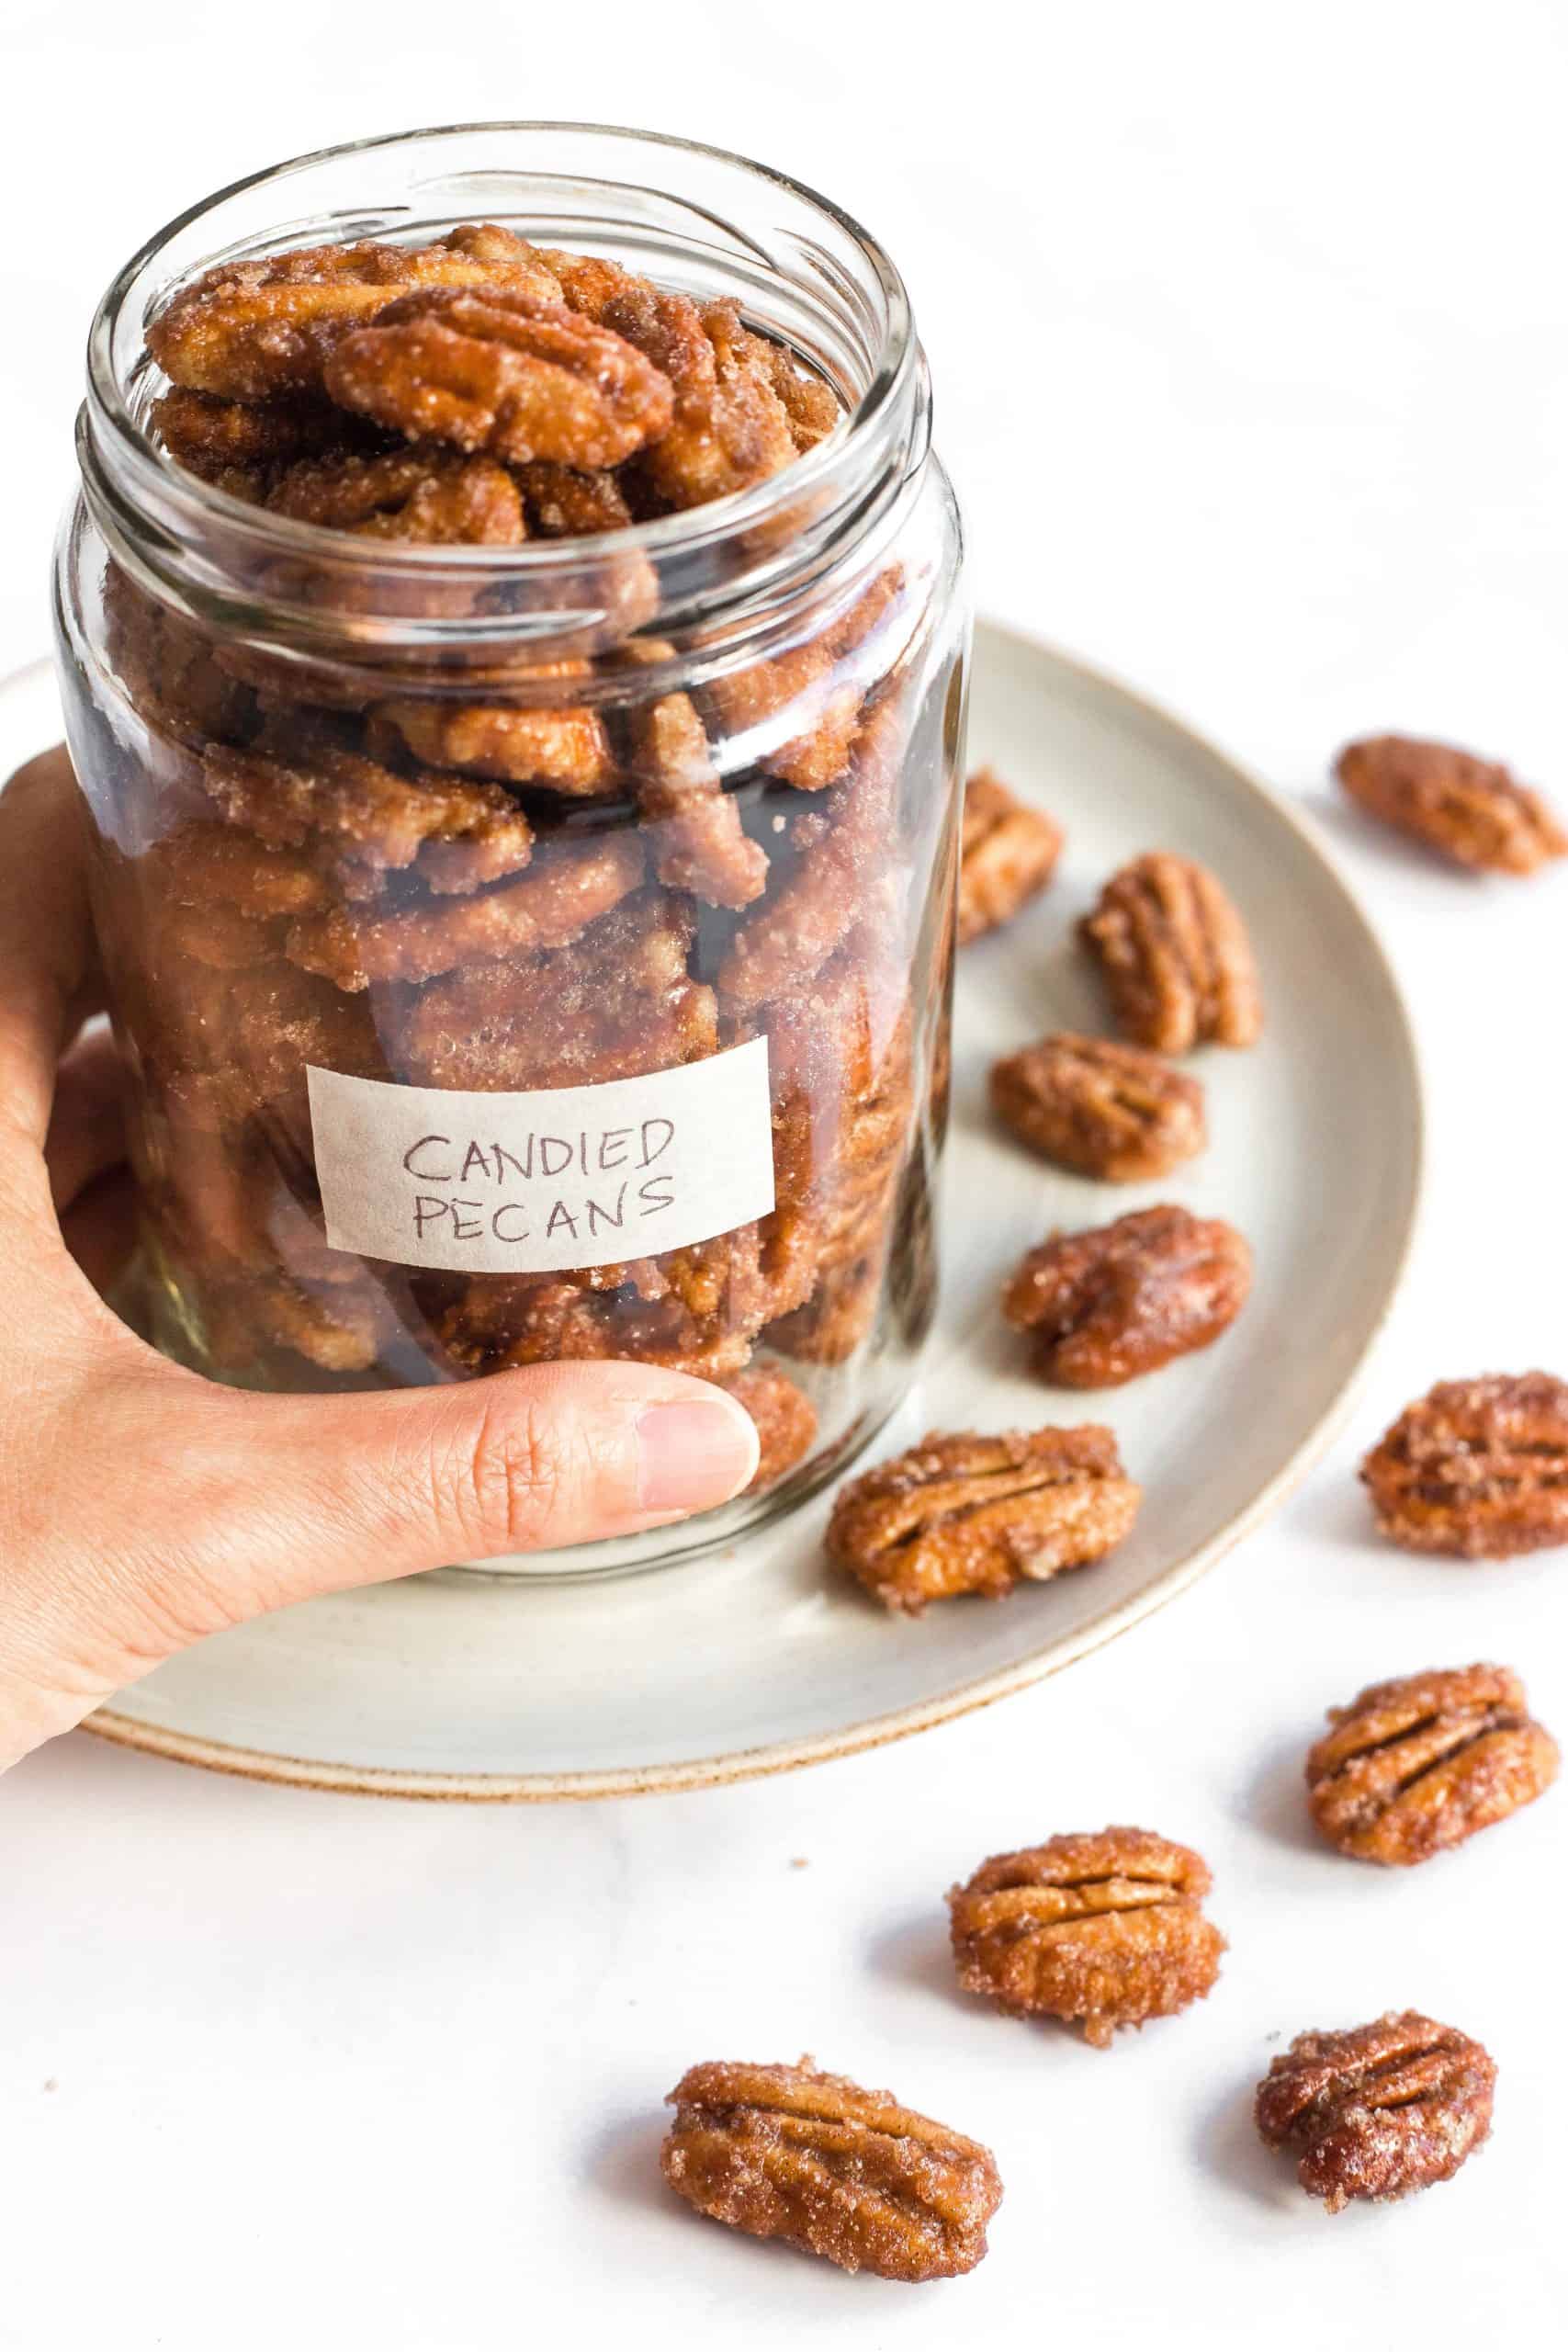 Hand holding a jar full of stovetop candied pecans.